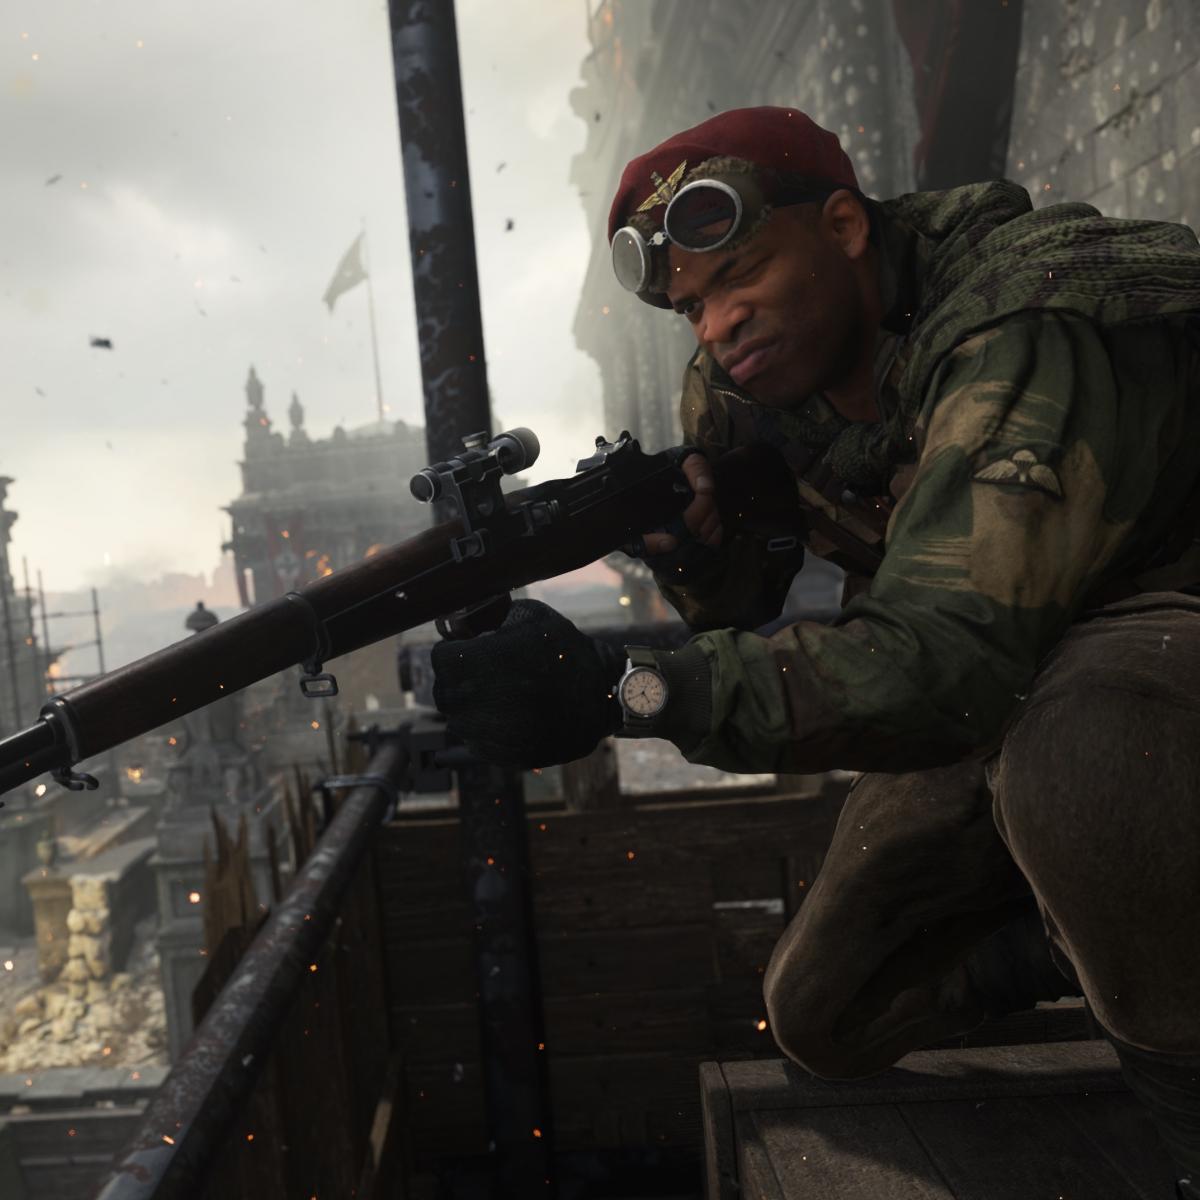 Call of Duty Vanguard Review for Campaign, Multiplayer, Zombies